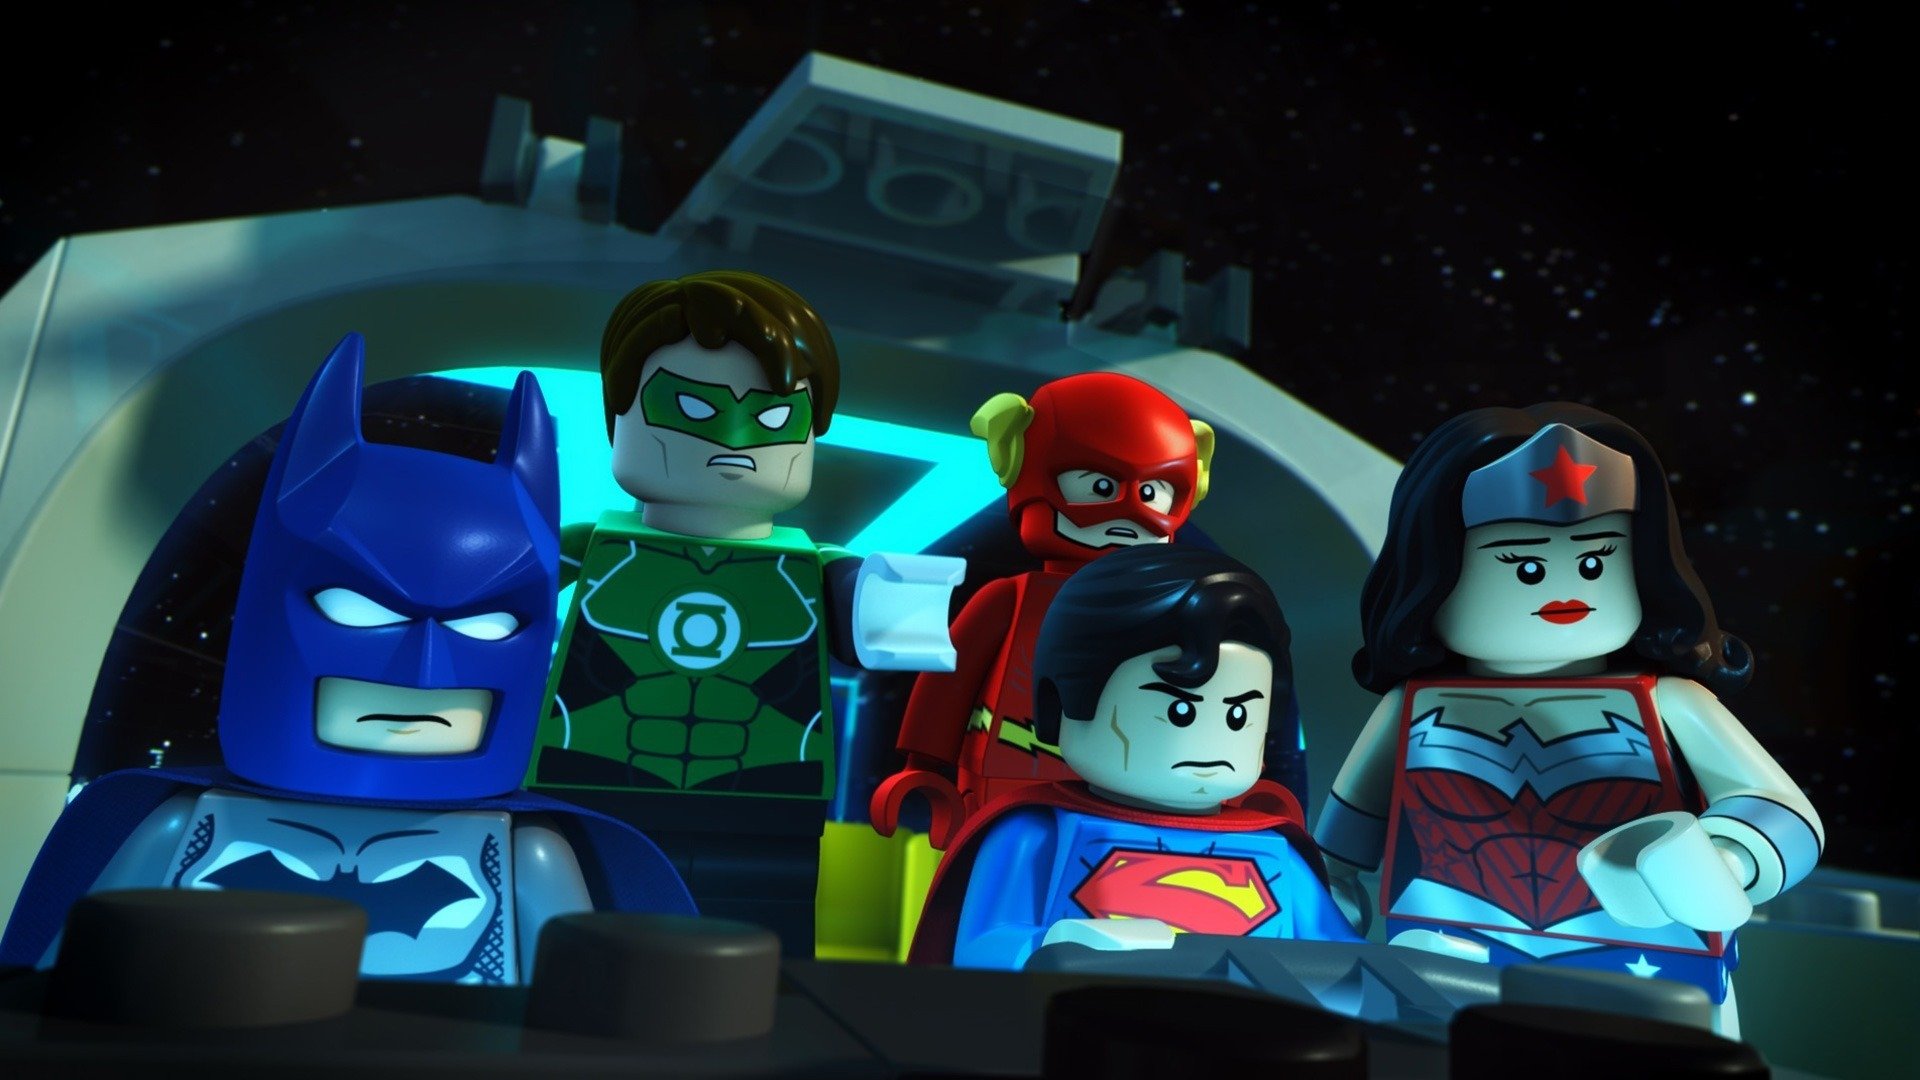 LEGO DC Super Heroes: Justice League -- Attack of the Legion of Doom!